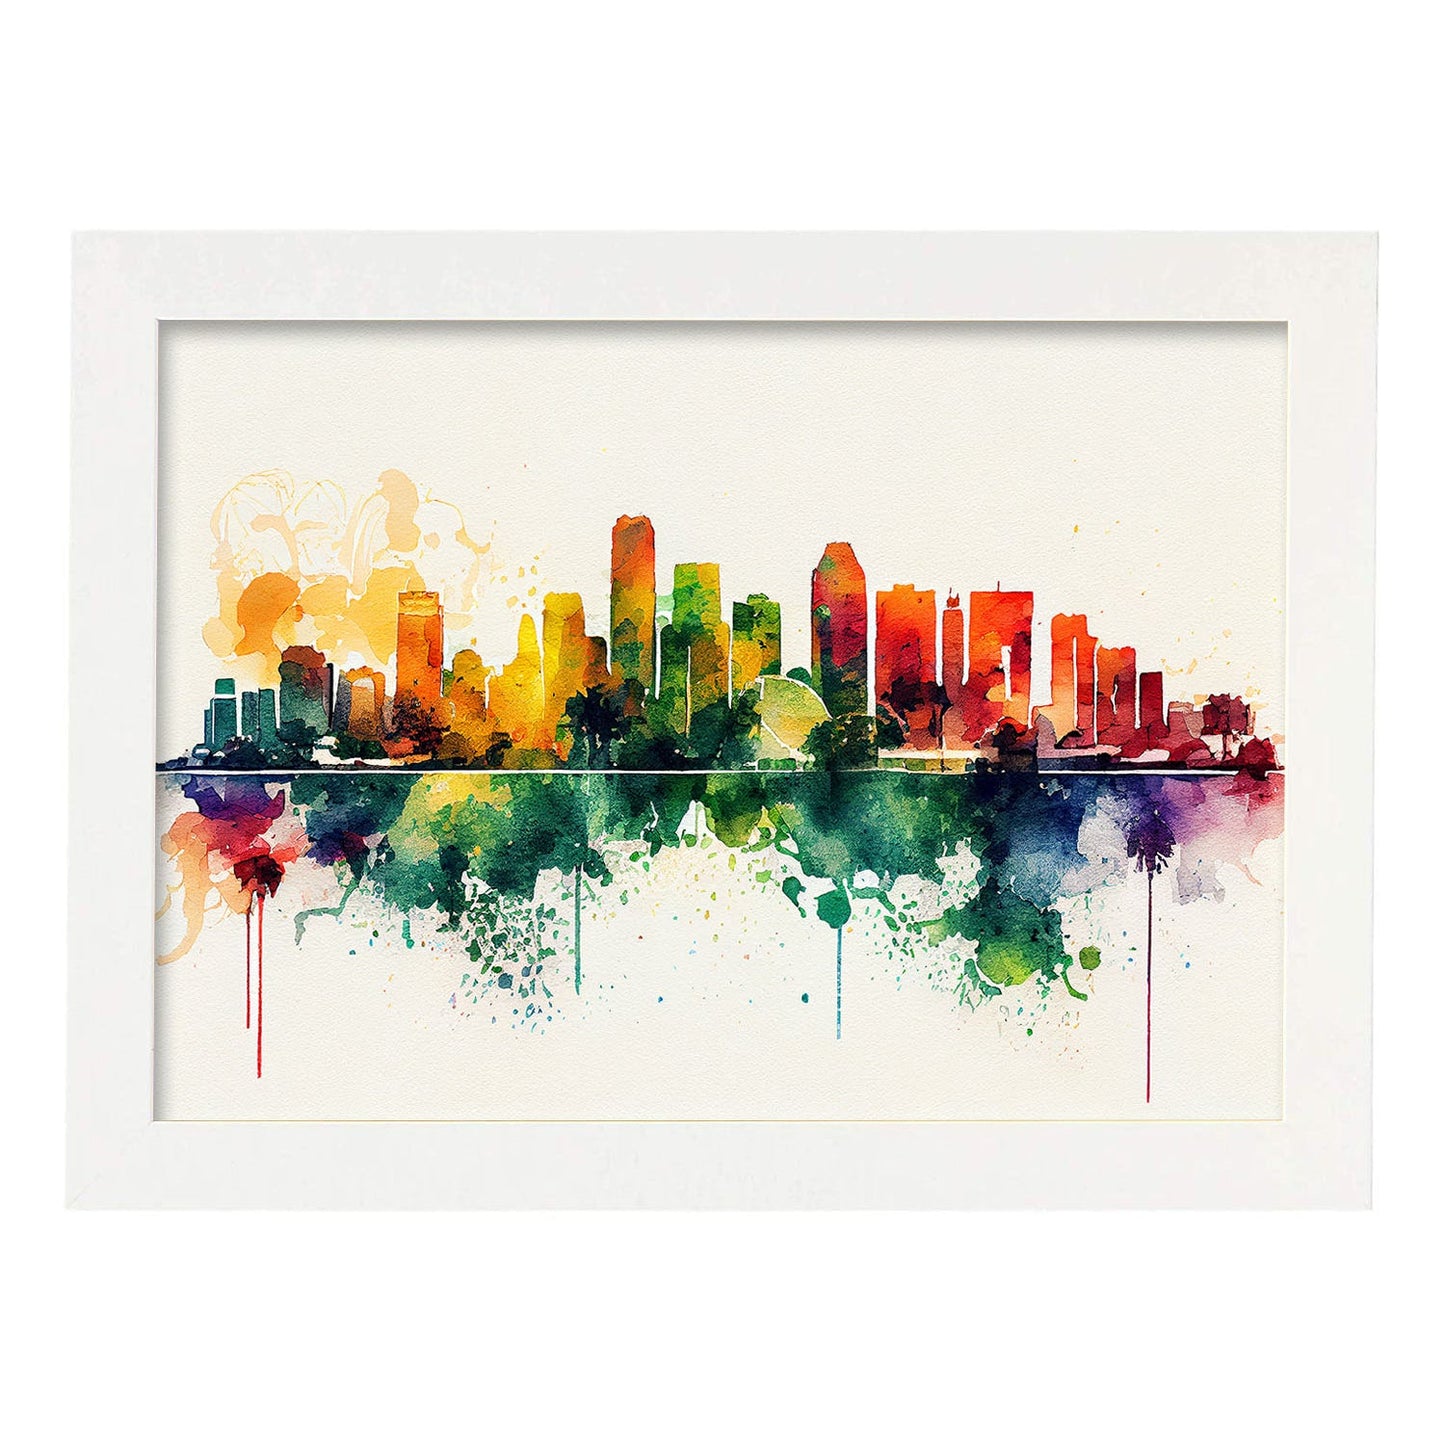 Nacnic watercolor of a skyline of the city of Miami_1. Aesthetic Wall Art Prints for Bedroom or Living Room Design.-Artwork-Nacnic-Nacnic Estudio SL